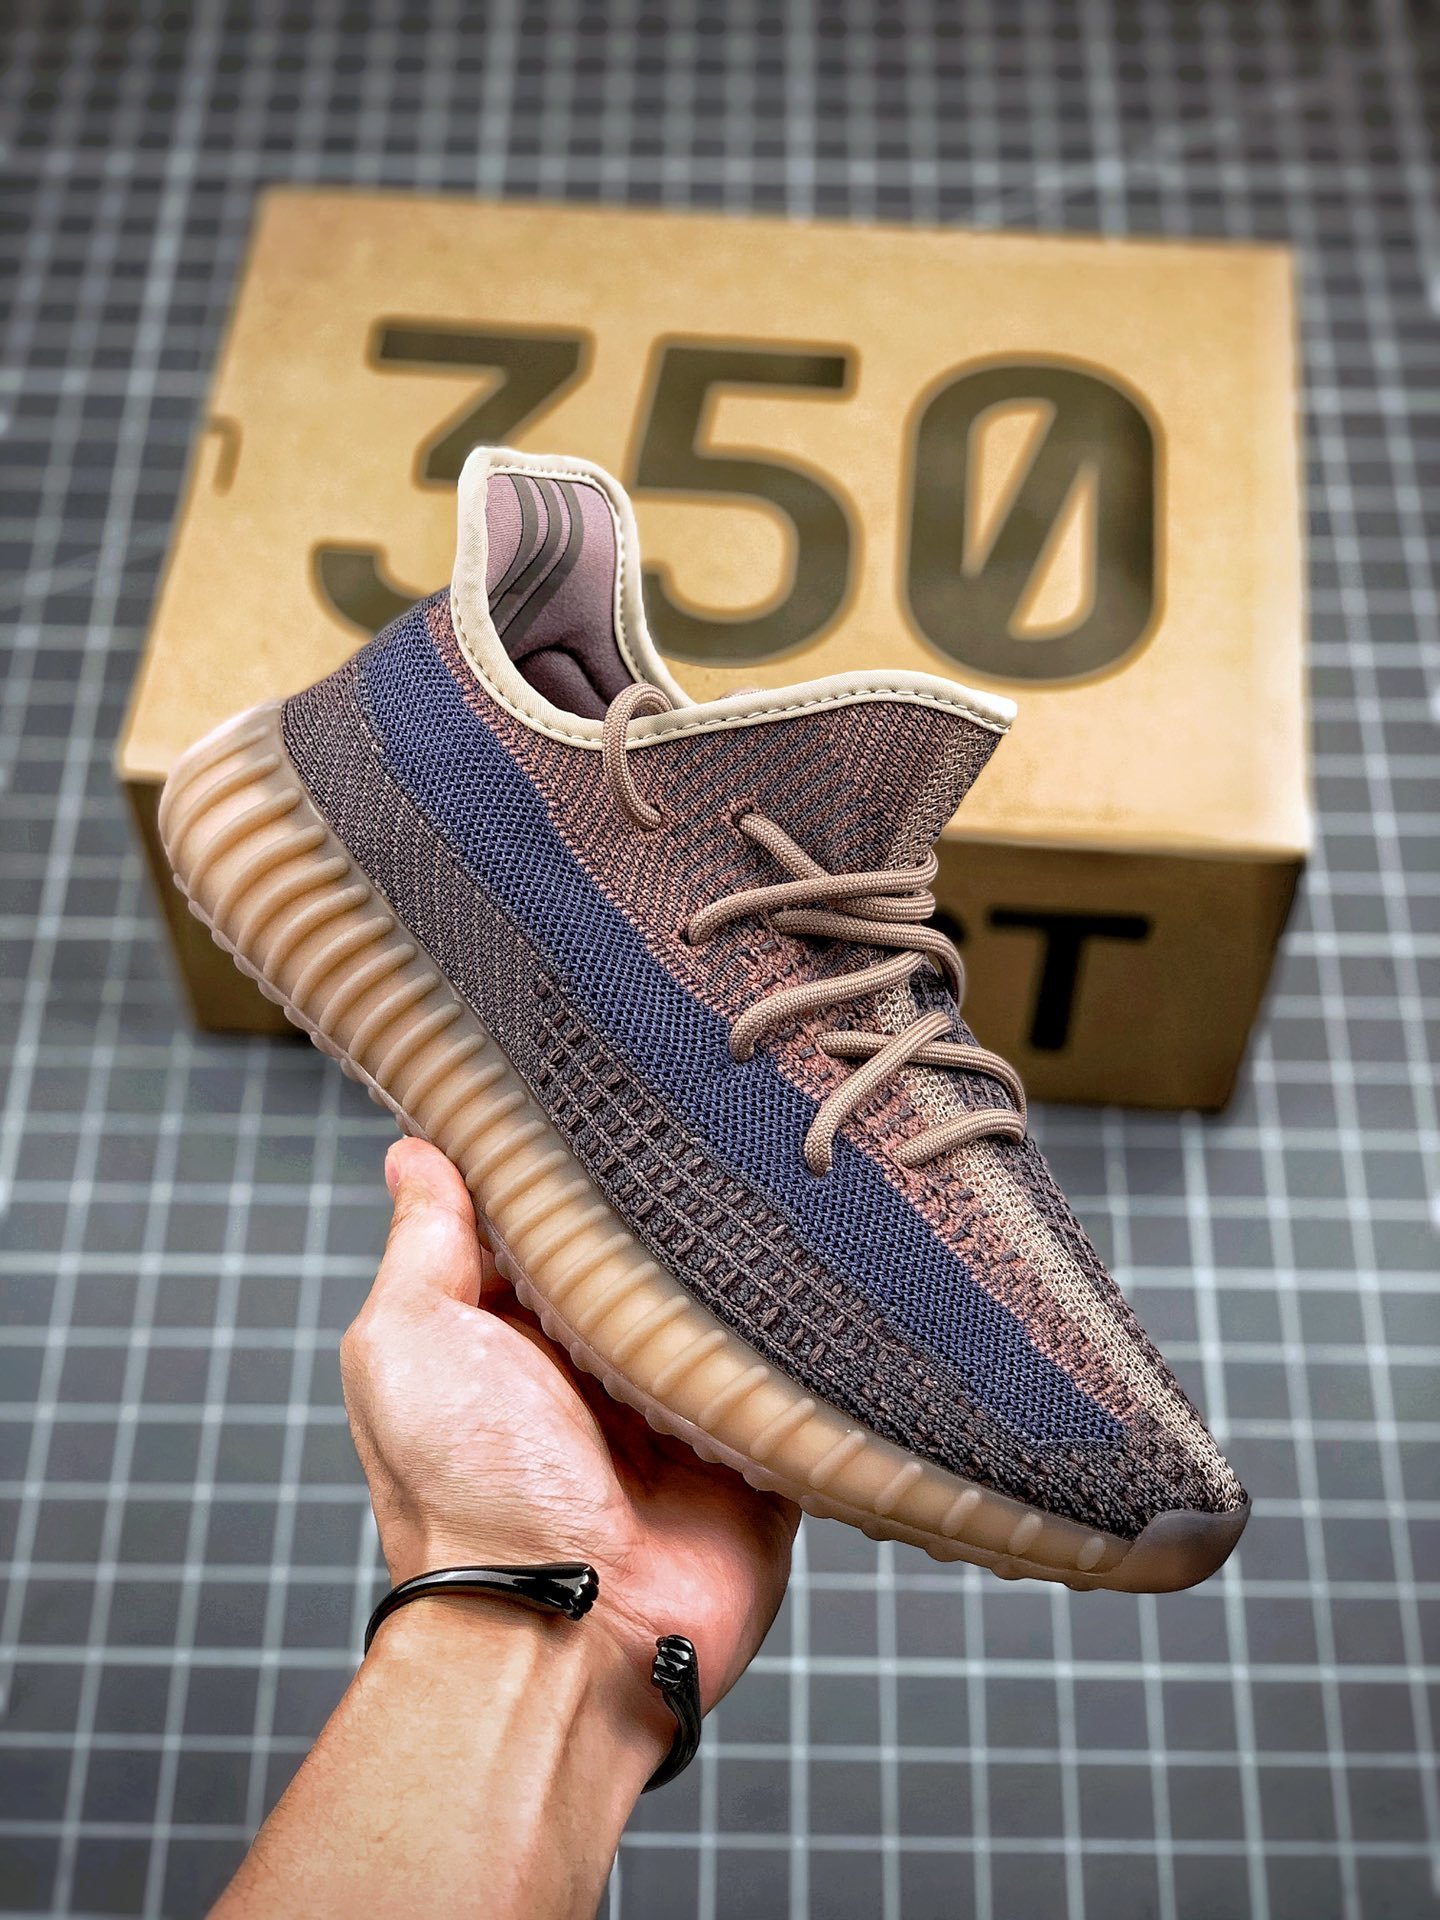 adidas Yeezy Boost 350 V2 "Fade" Shoes